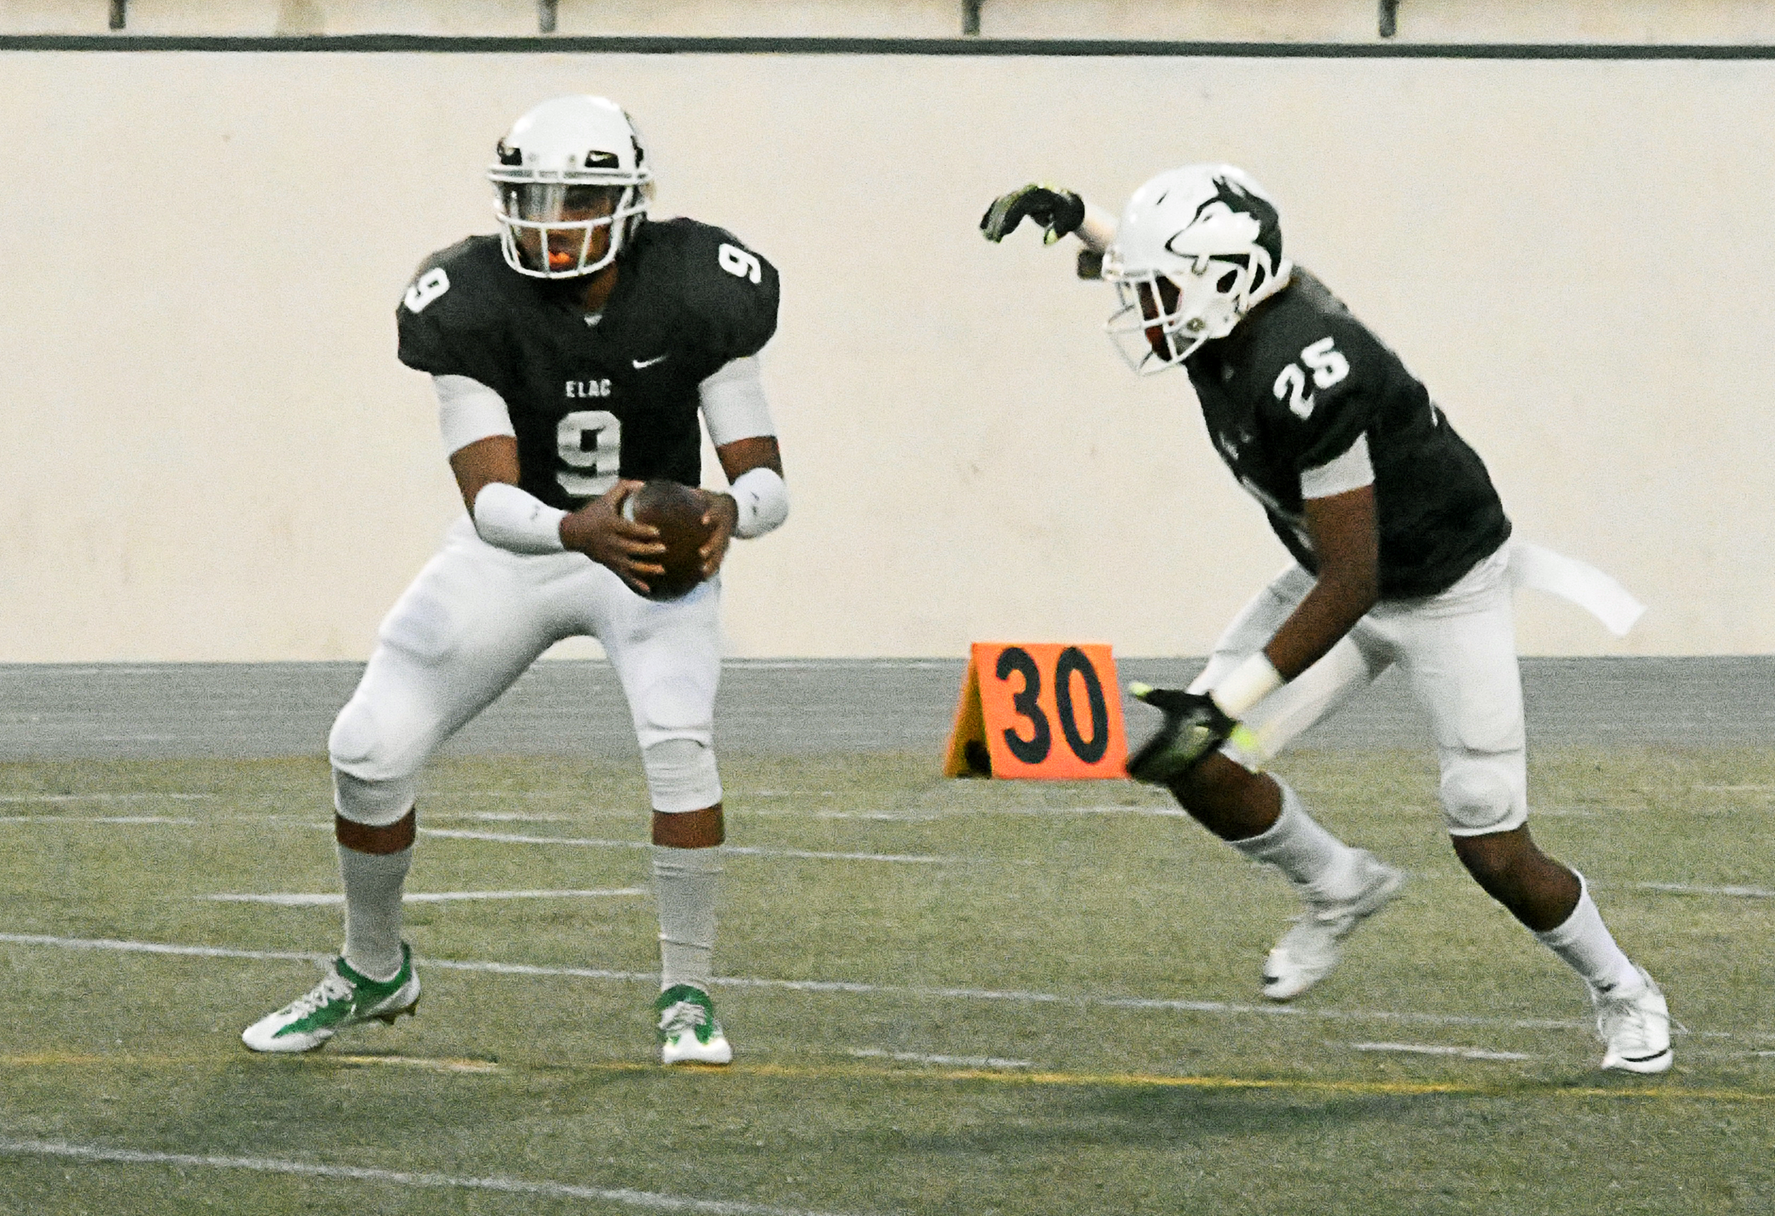 East Los Angeles College sophomore quarterback Jonathan Santos hands off to freshman wide receiver Aubrey Mosley-Laughlin who rushes for 3 yards to the ELAC 48 yard line in a 63-17 Husky win against Pasadena City on Nov. 5. (Photo by DeeDee Jackson)